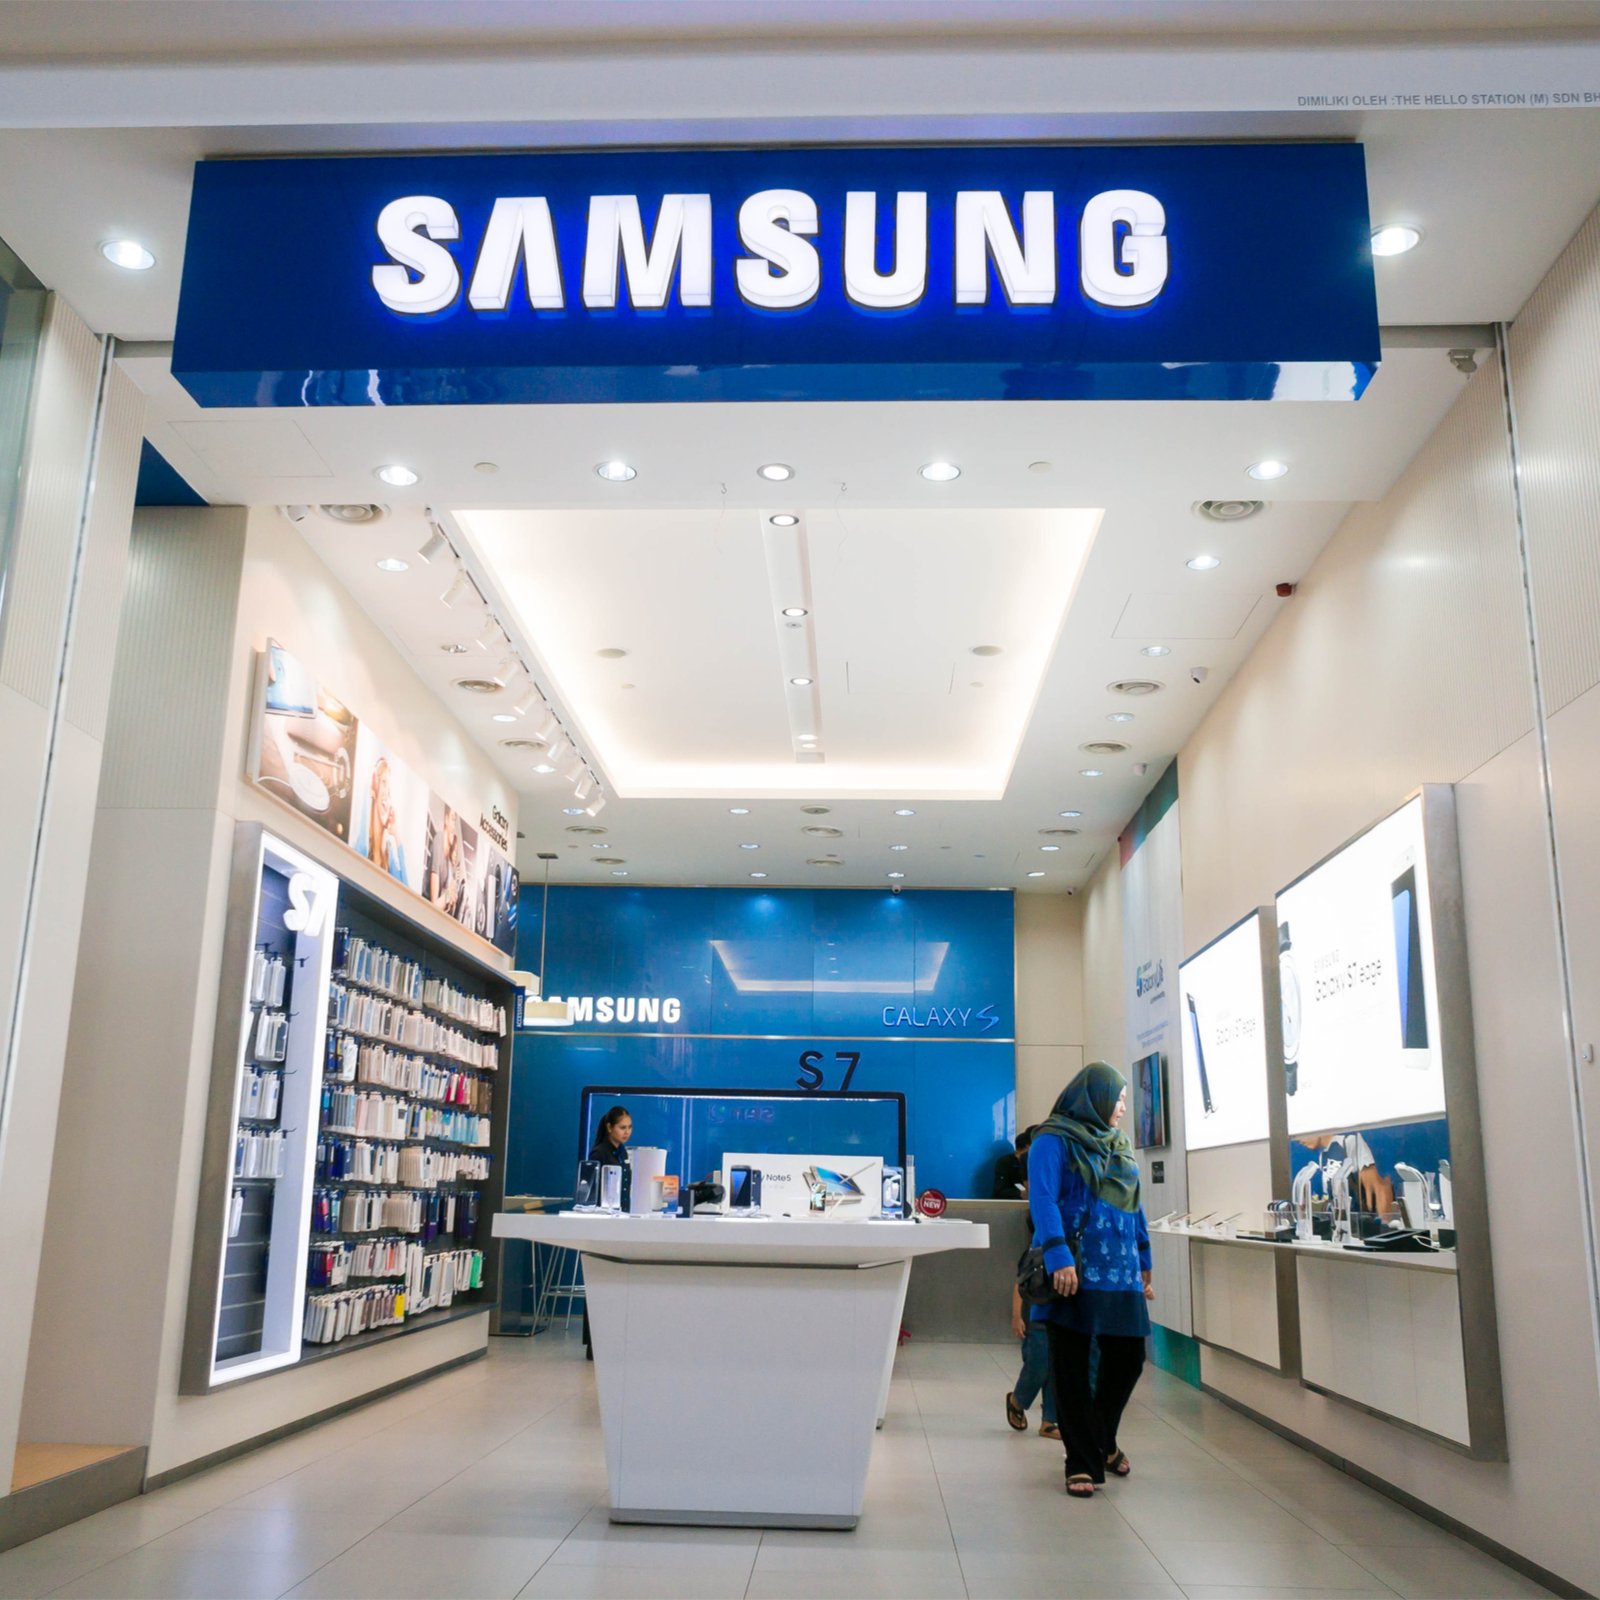 Samsung Enters the Bitcoin Mining ASIC Manufacturing Business